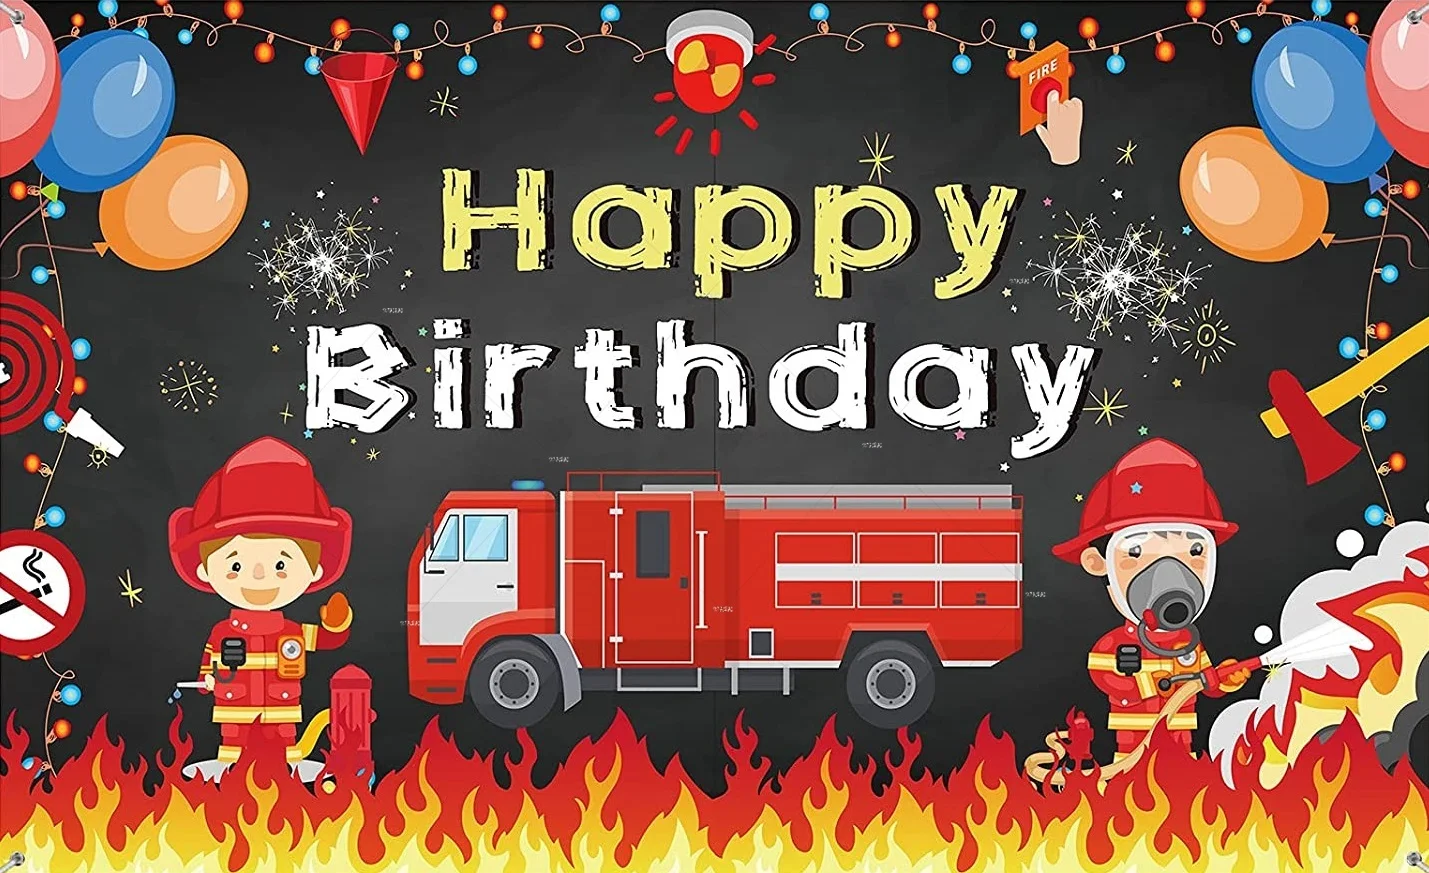 Red Firetruck Birthday Party Supplies Decorations Backdrop Background Banner for Boys Girls Fireman Firefighter Kids Photo Booth enlarge